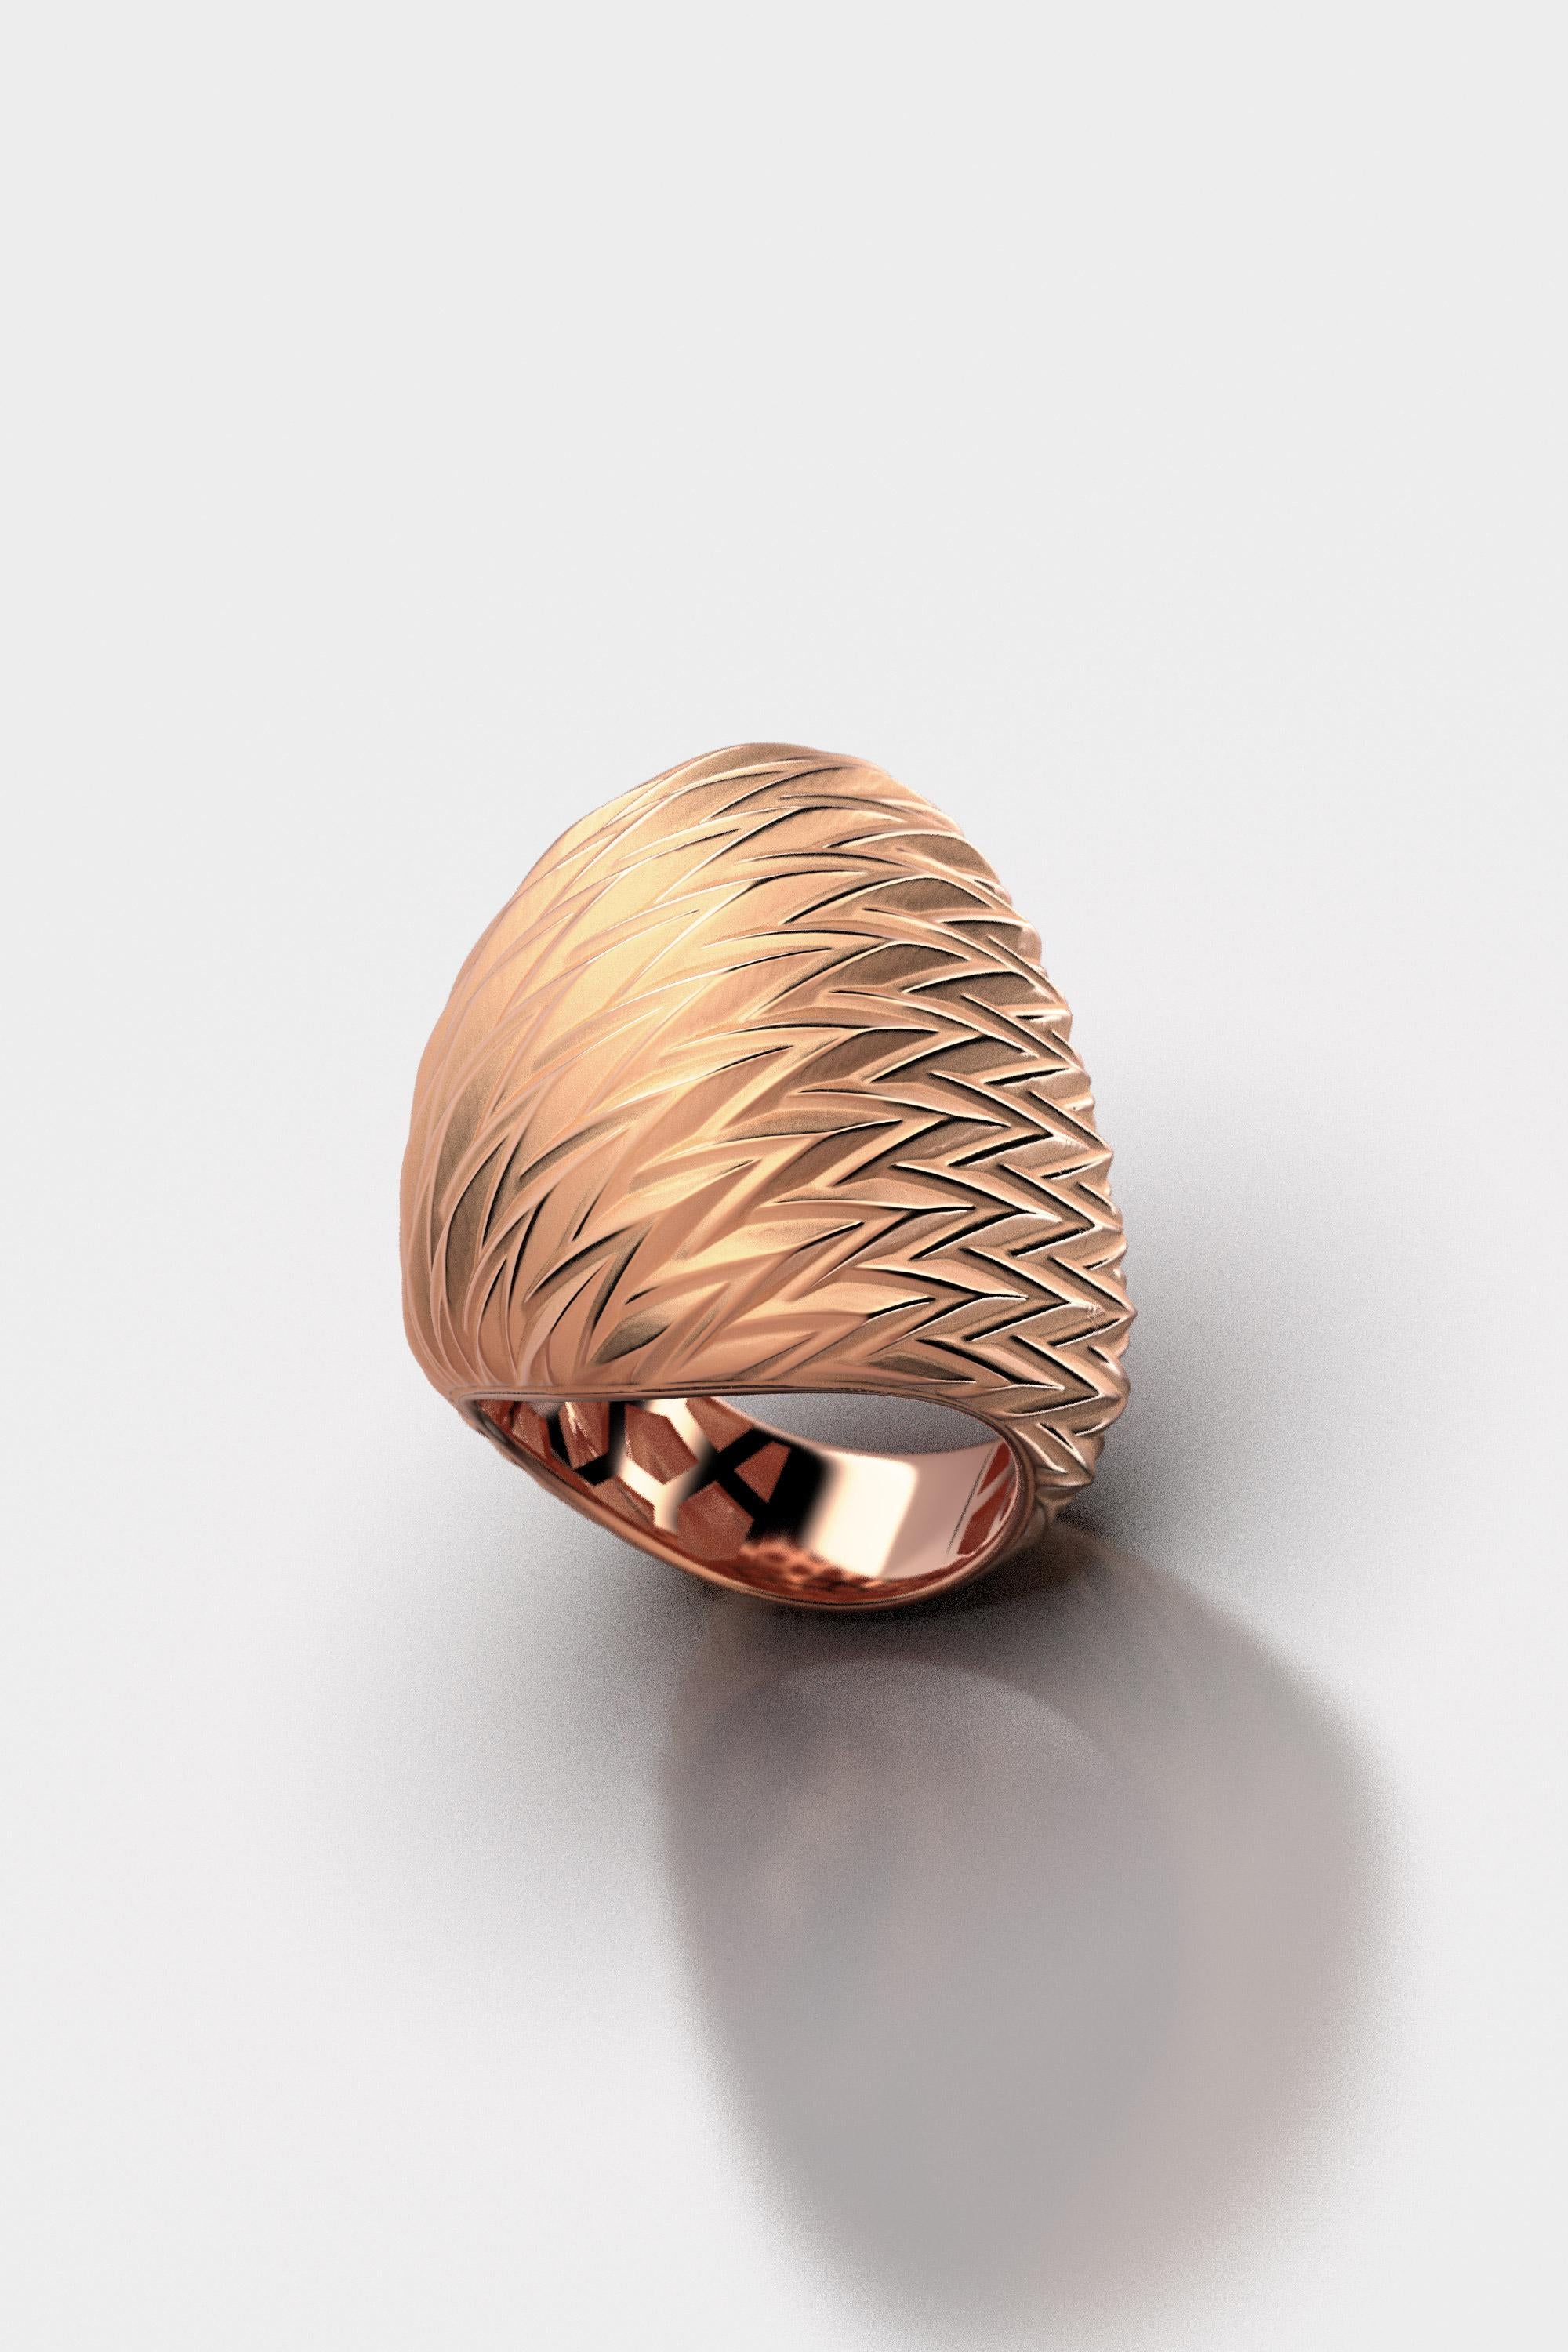 For Sale:  18k Rose Gold Ring Made in Italy, Dome Ring, Italian Fine Jewelry  10